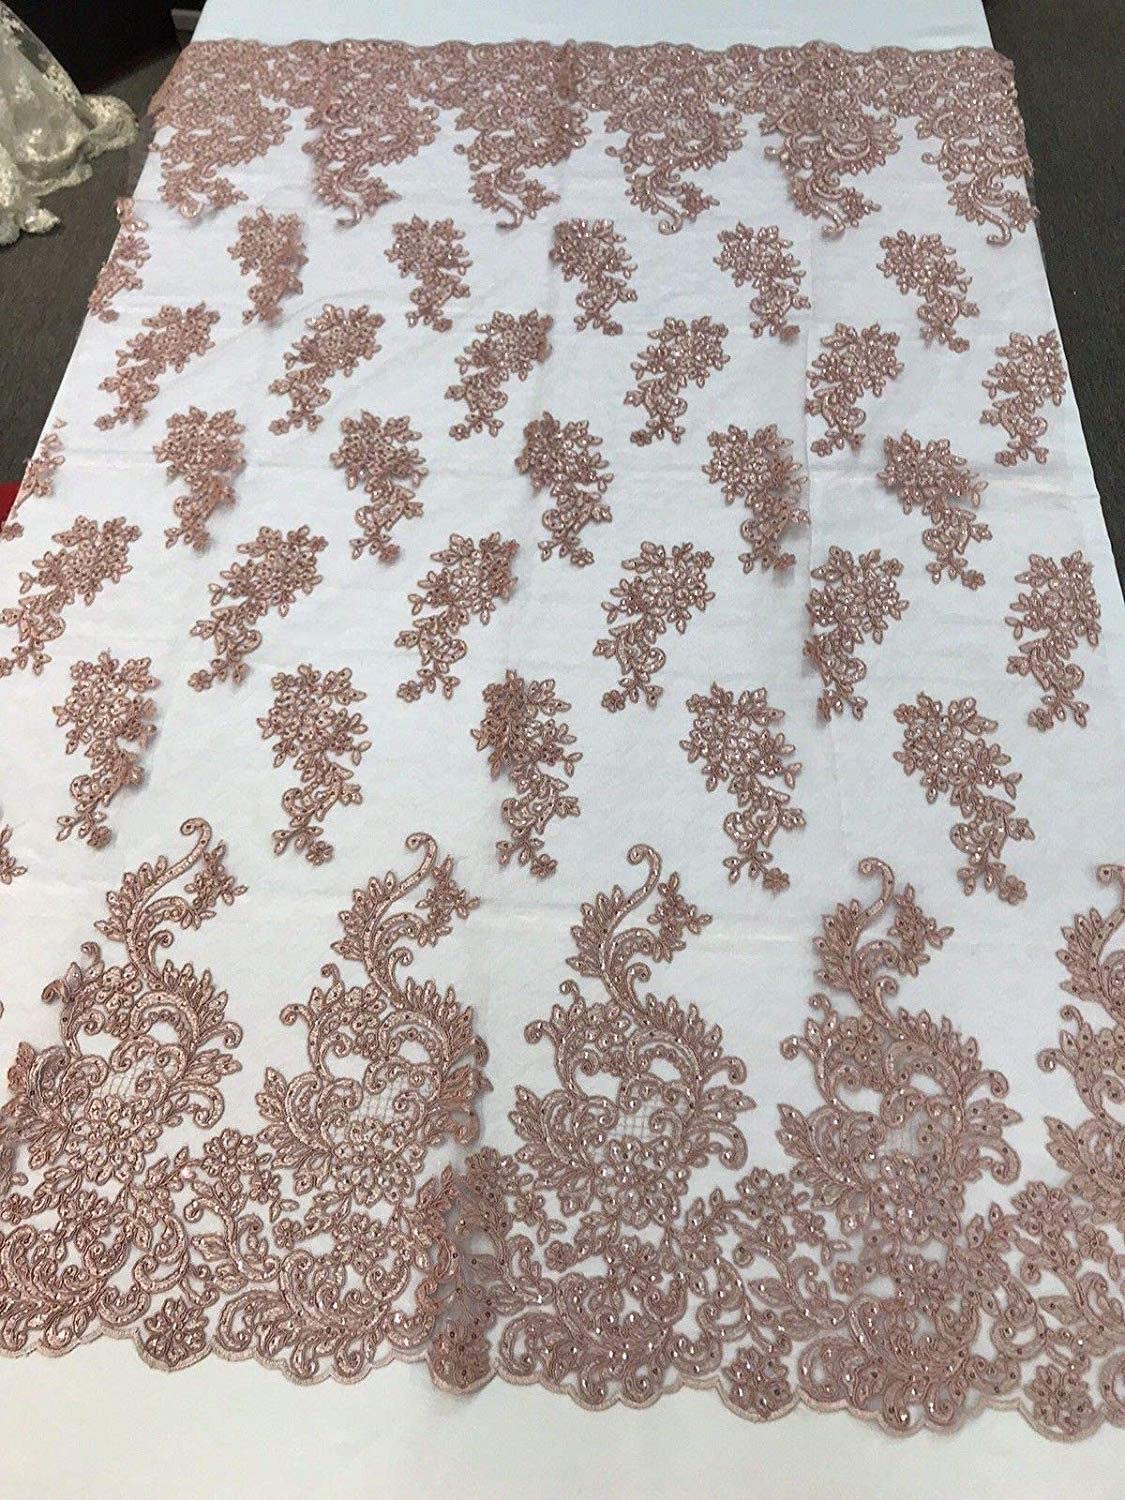 Sequins Lace With Cord Embroidery Flower on Mesh Fabric Texture By The Yard. (Dusty Rose)